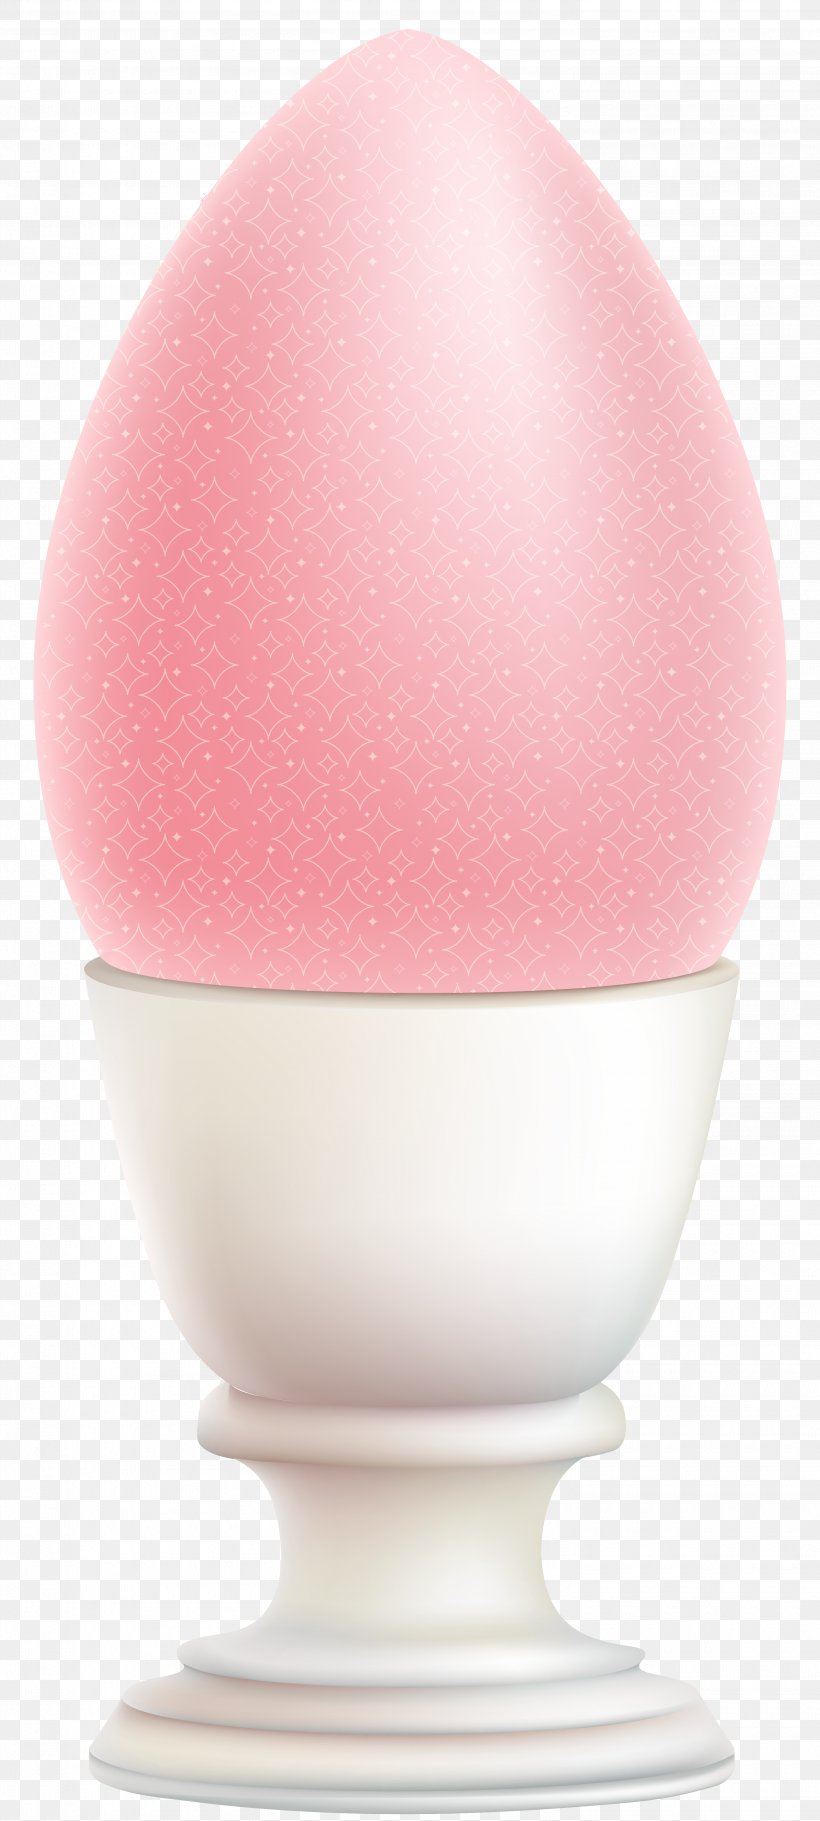 Product Egg Design, PNG, 2935x6518px, Egg, Pink, Product, Product Design Download Free